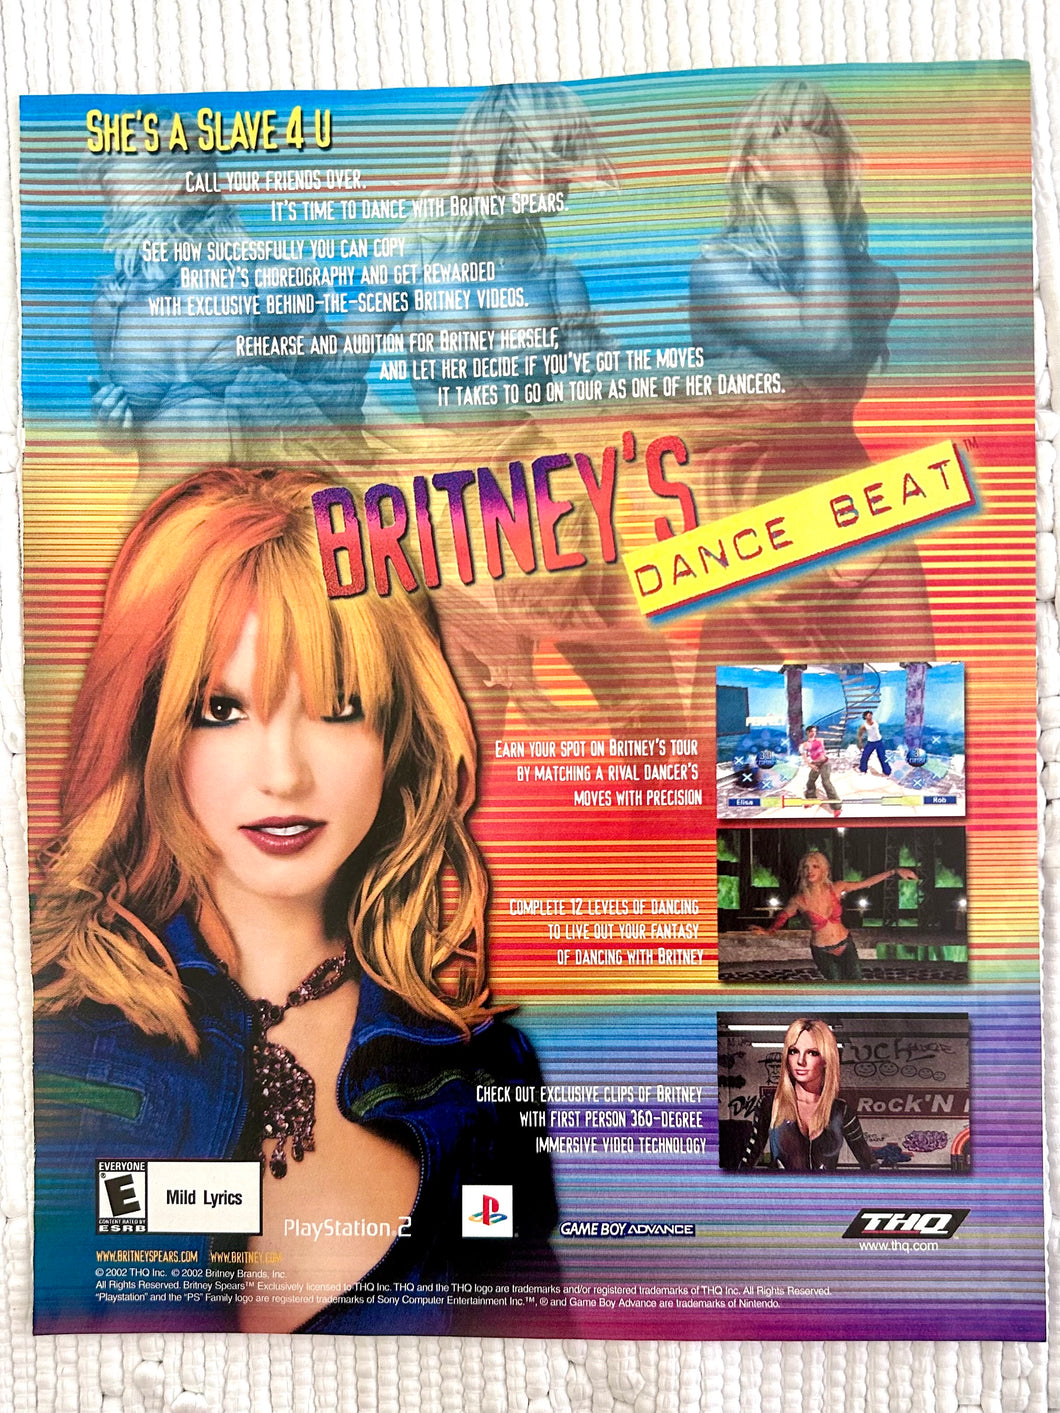 Britney's Dance Beat - PS2 GBA - Original Vintage Advertisement - Print Ads - Laminated A4 Poster